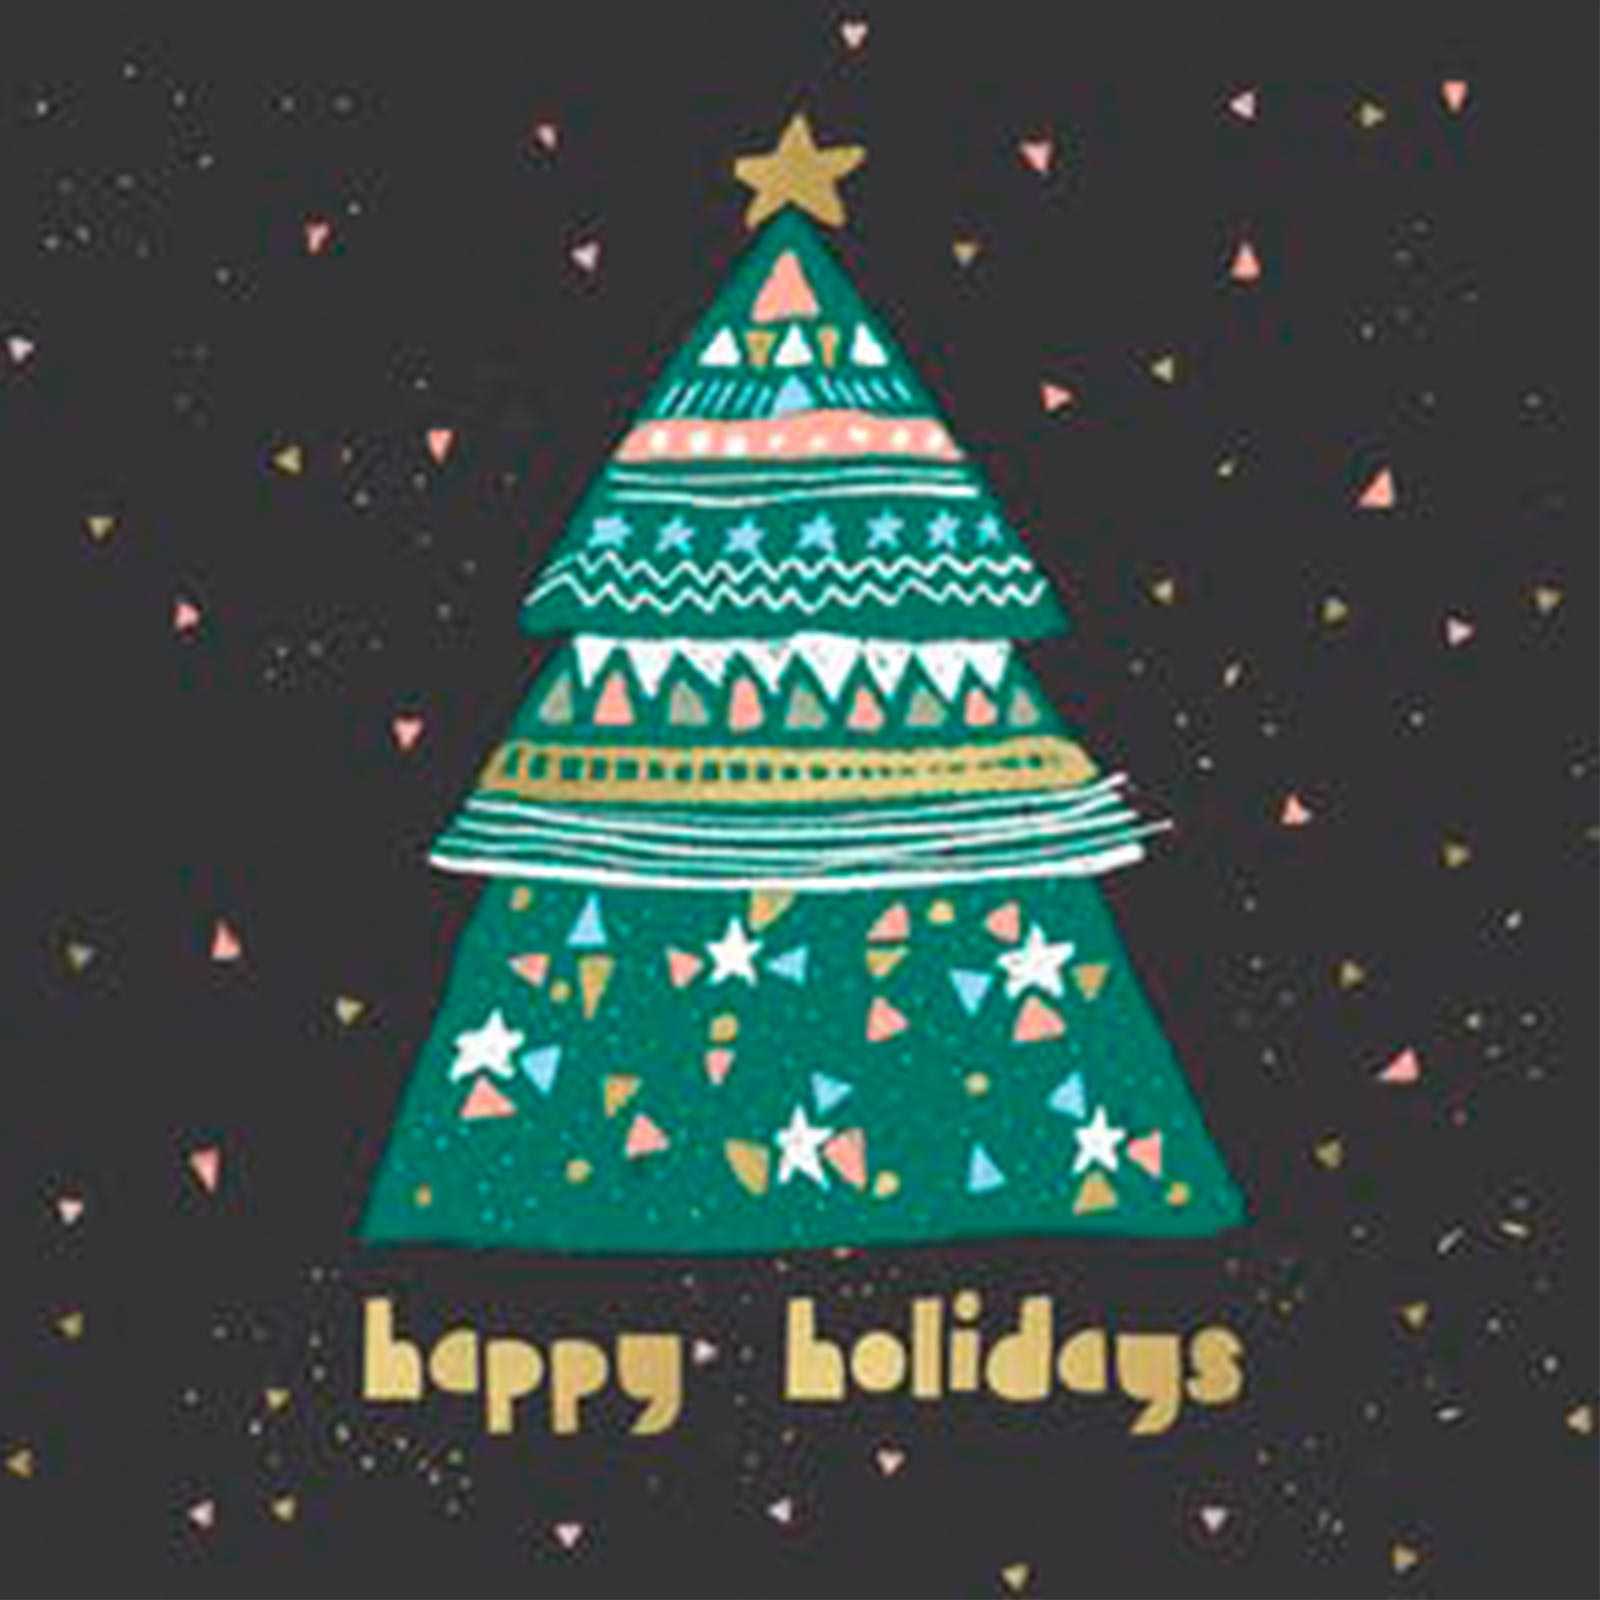 Free Christmas Cards To Print Out And Send This Year Throughout Print Your Own Christmas Cards Templates